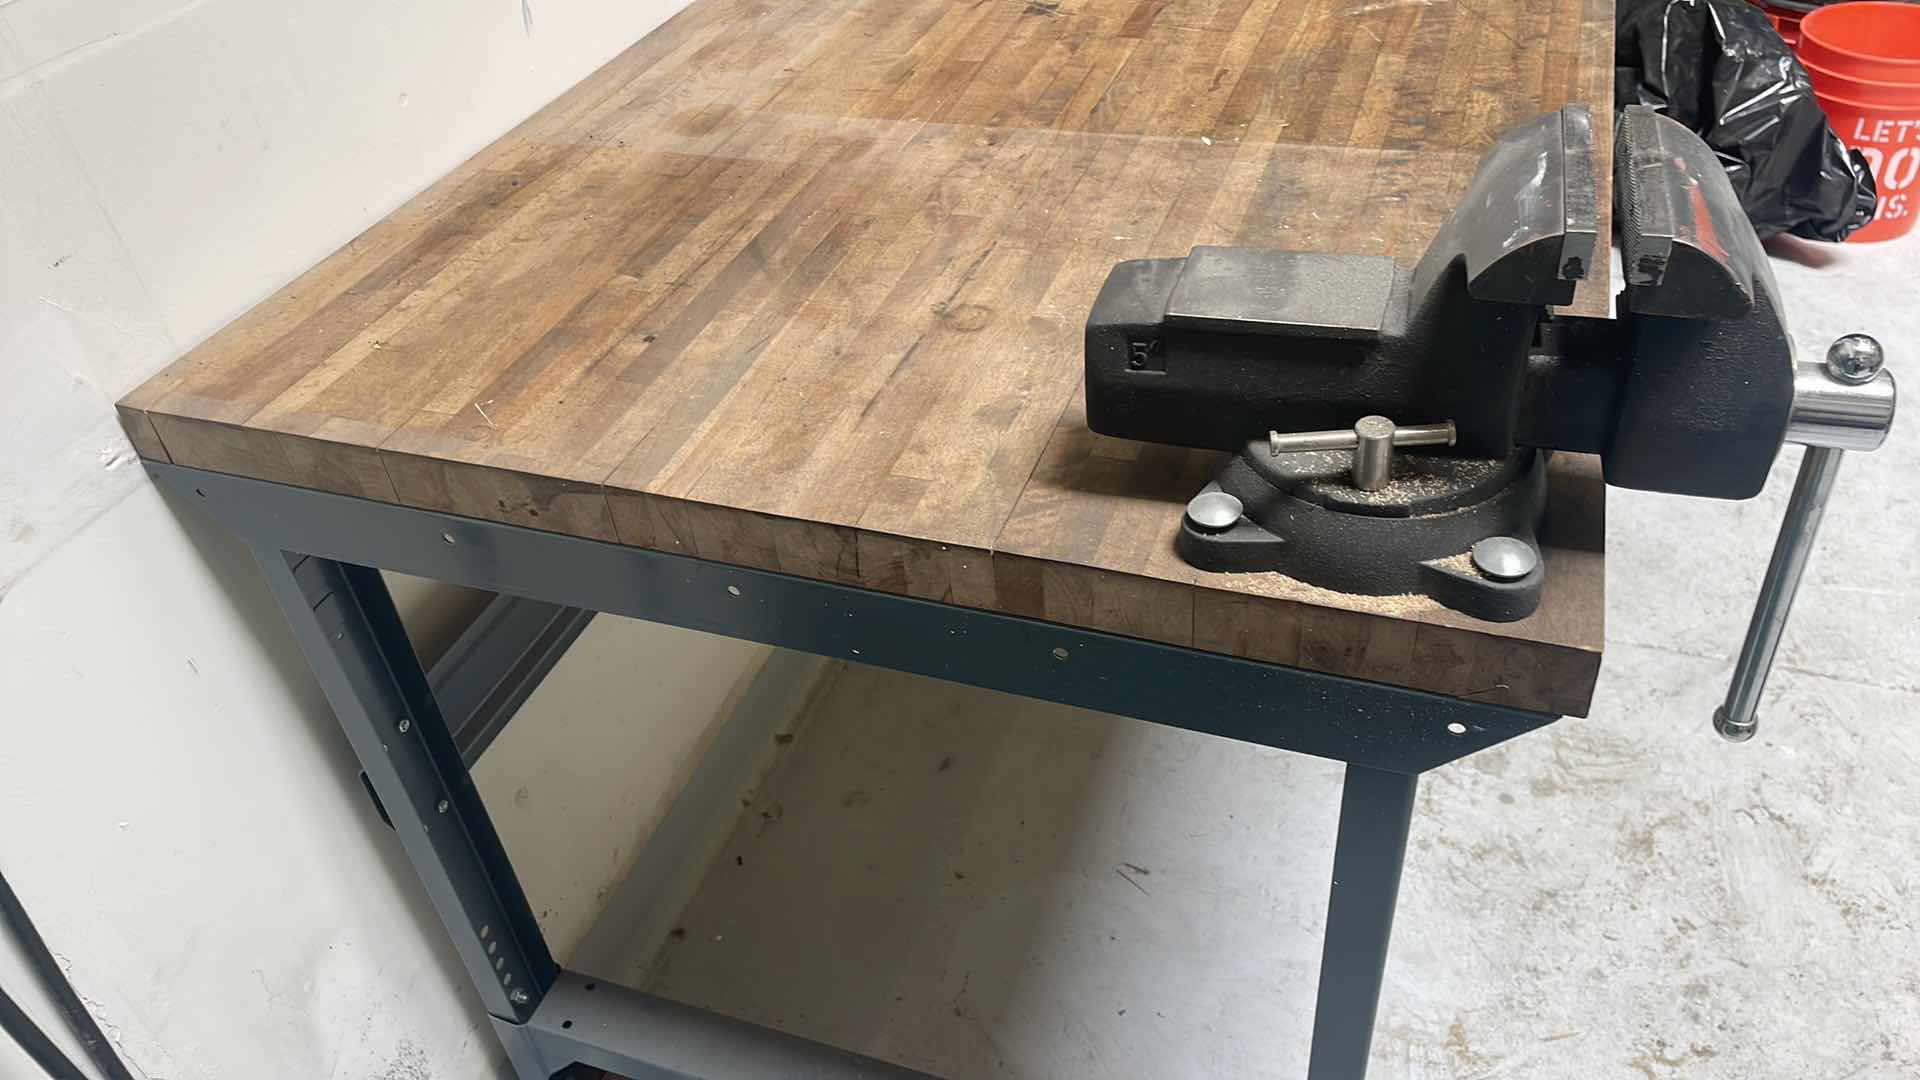 Photo 4 of WORK BENCH 72” x 36” WITH PALMGREN 5” VISE